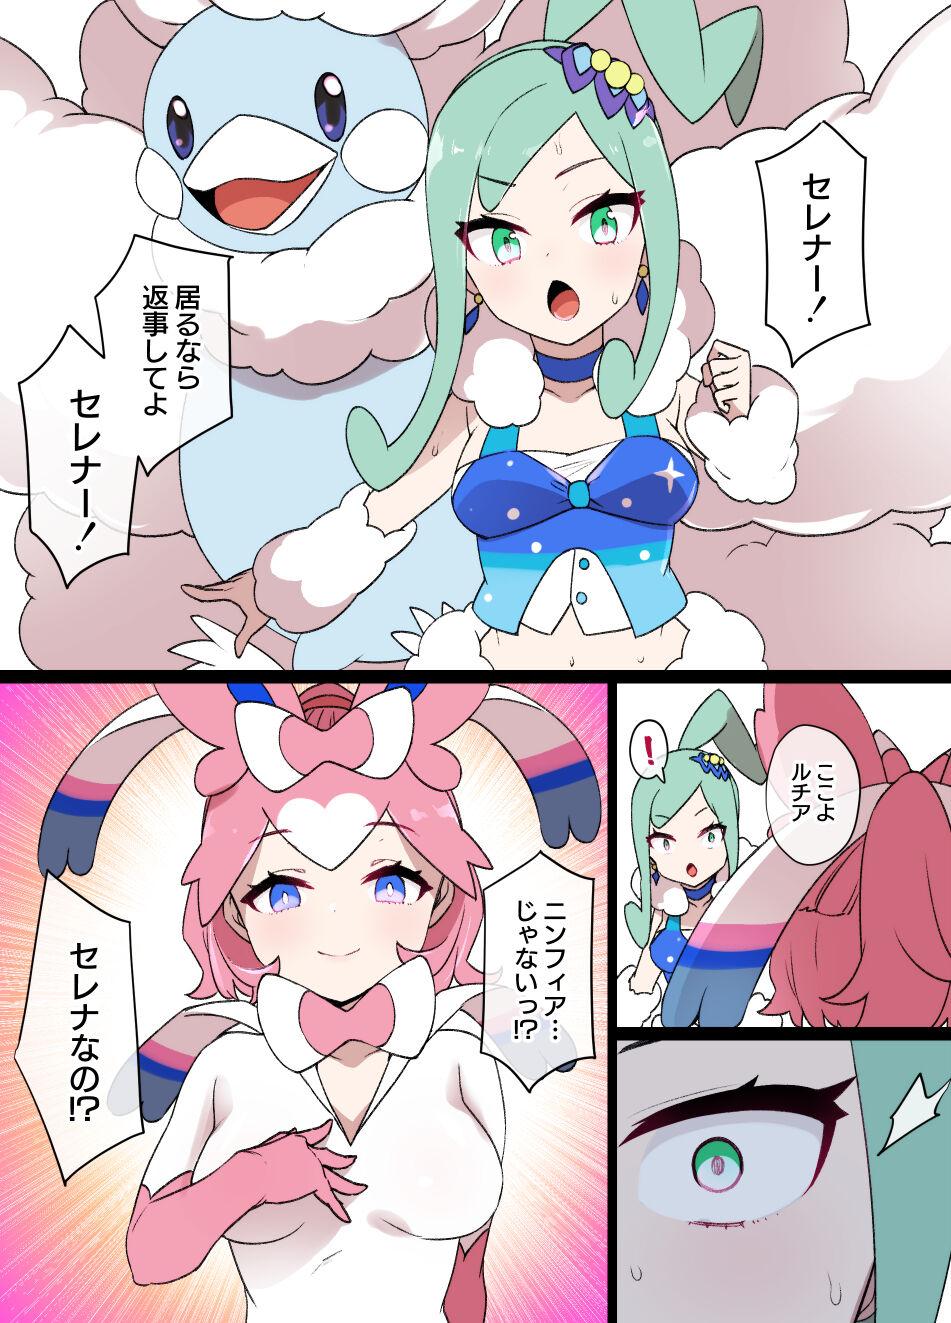 Bigboobs スレイブボール洗〇 ルチア＆メガチルタリス 漫画9P - Pokemon | pocket monsters Oral - Picture 2